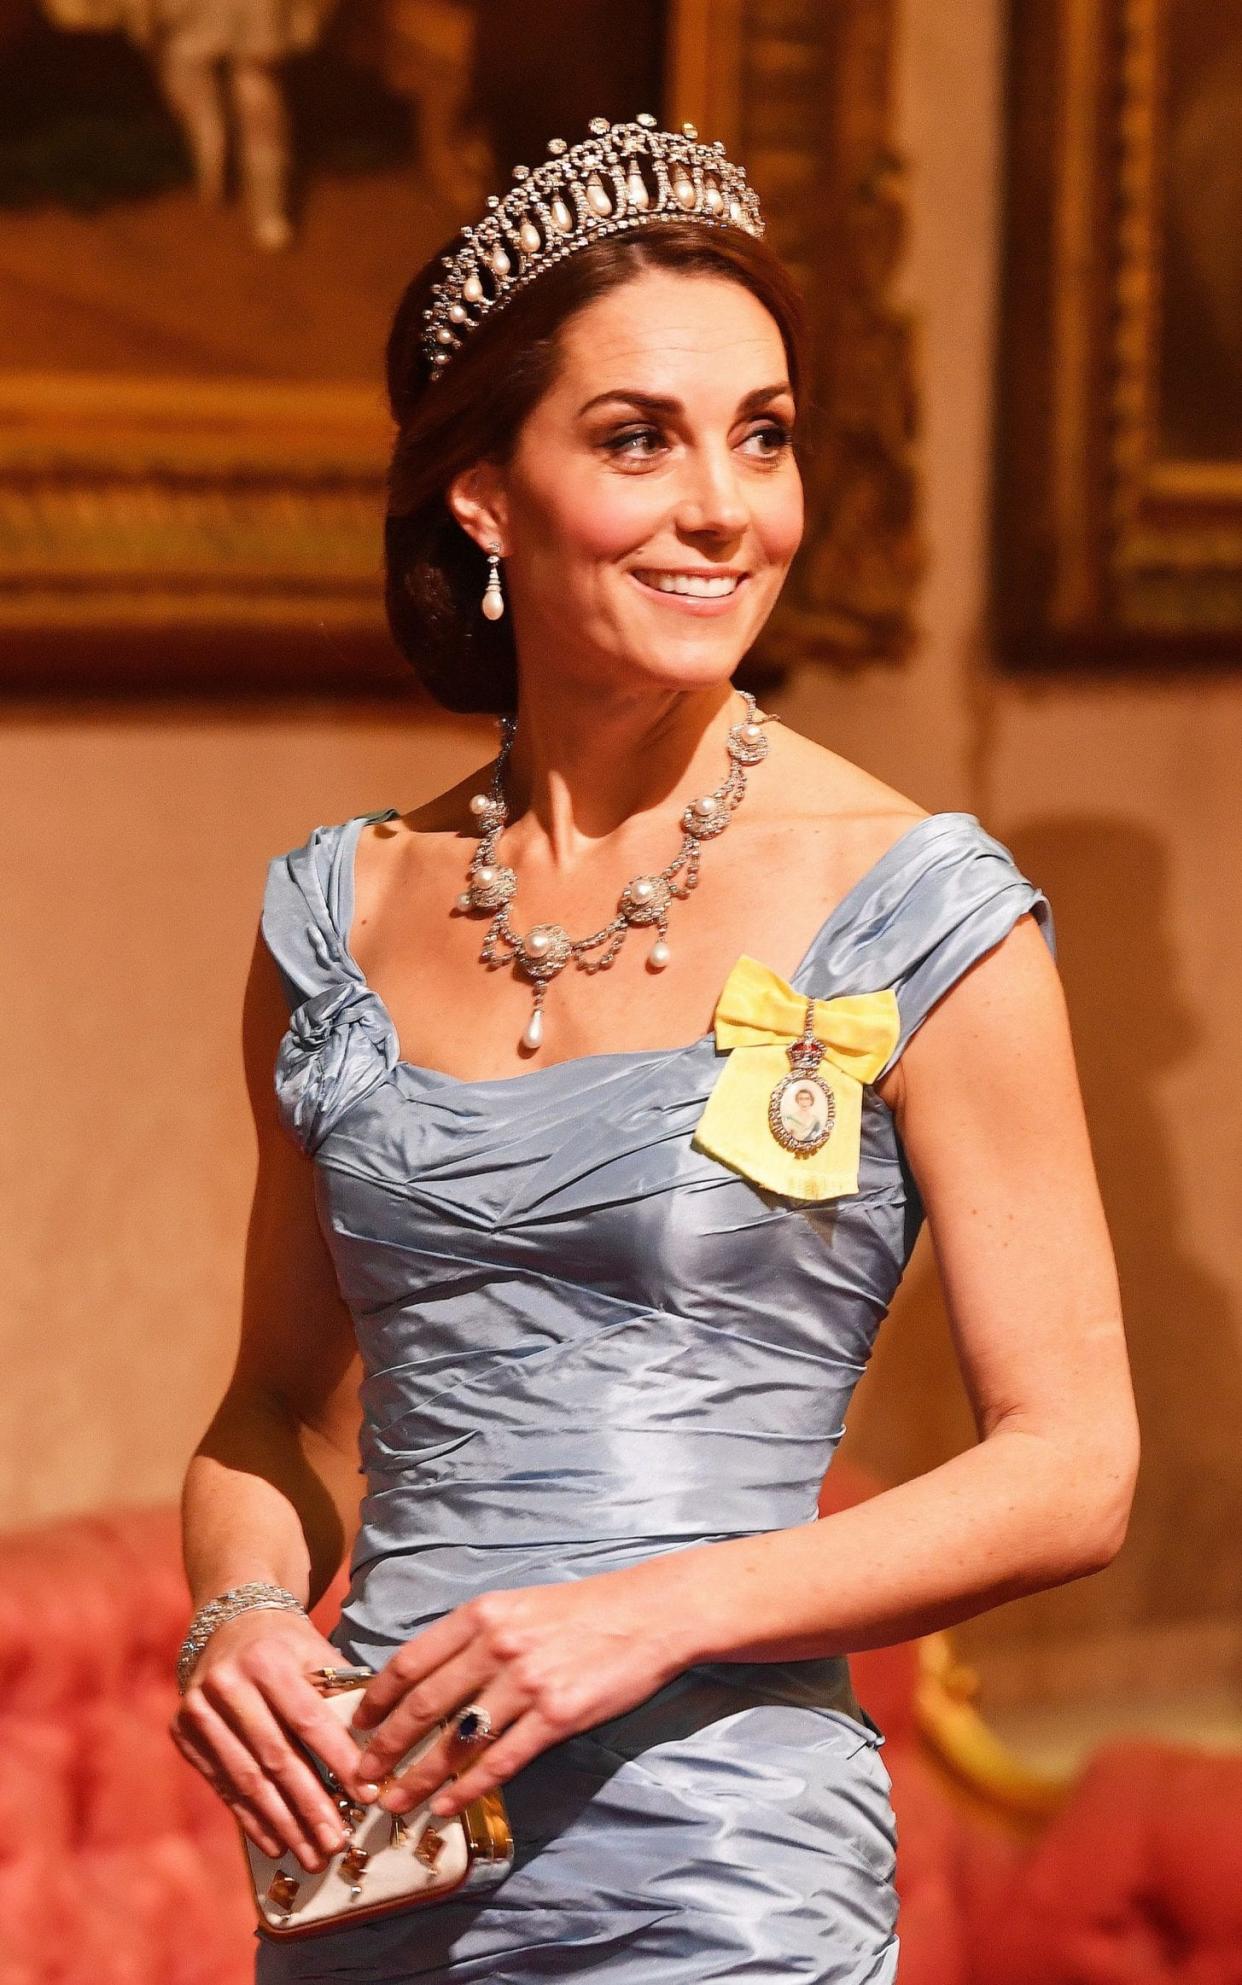 The Duchess of Cambridge wearing the Lover's Knot tiara, Princess Diana's pearl earrings and Queen Alexandra's wedding necklace at a state banquet for the King and Queen of the Netherlands - Getty Images Europe